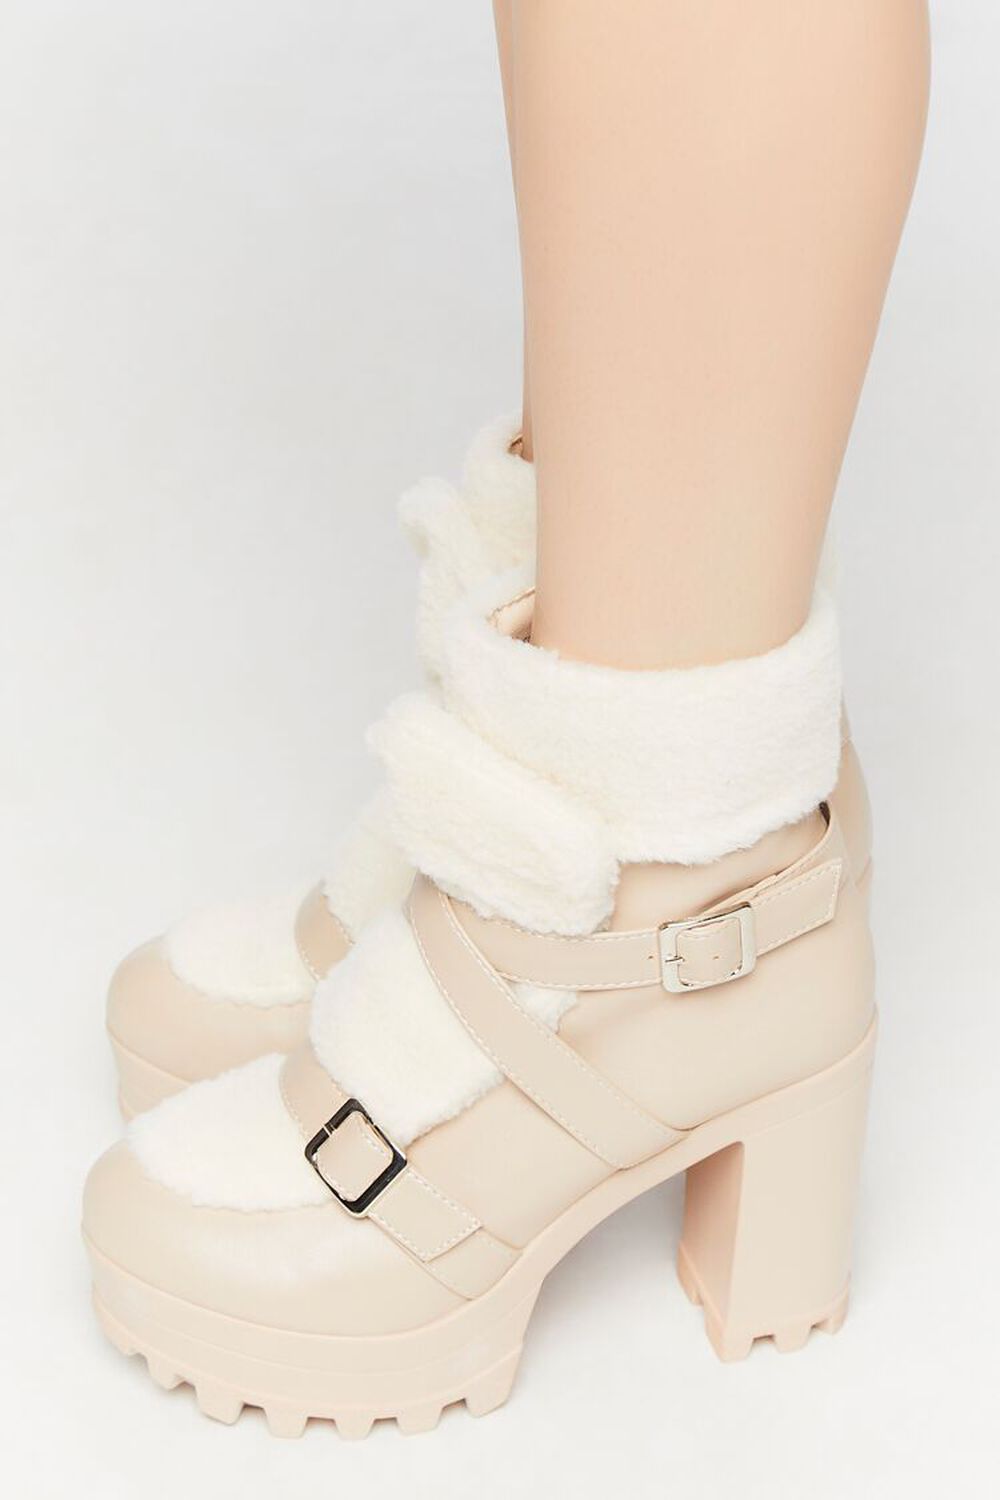 NUDE Faux Leather & Shearling Booties, image 2